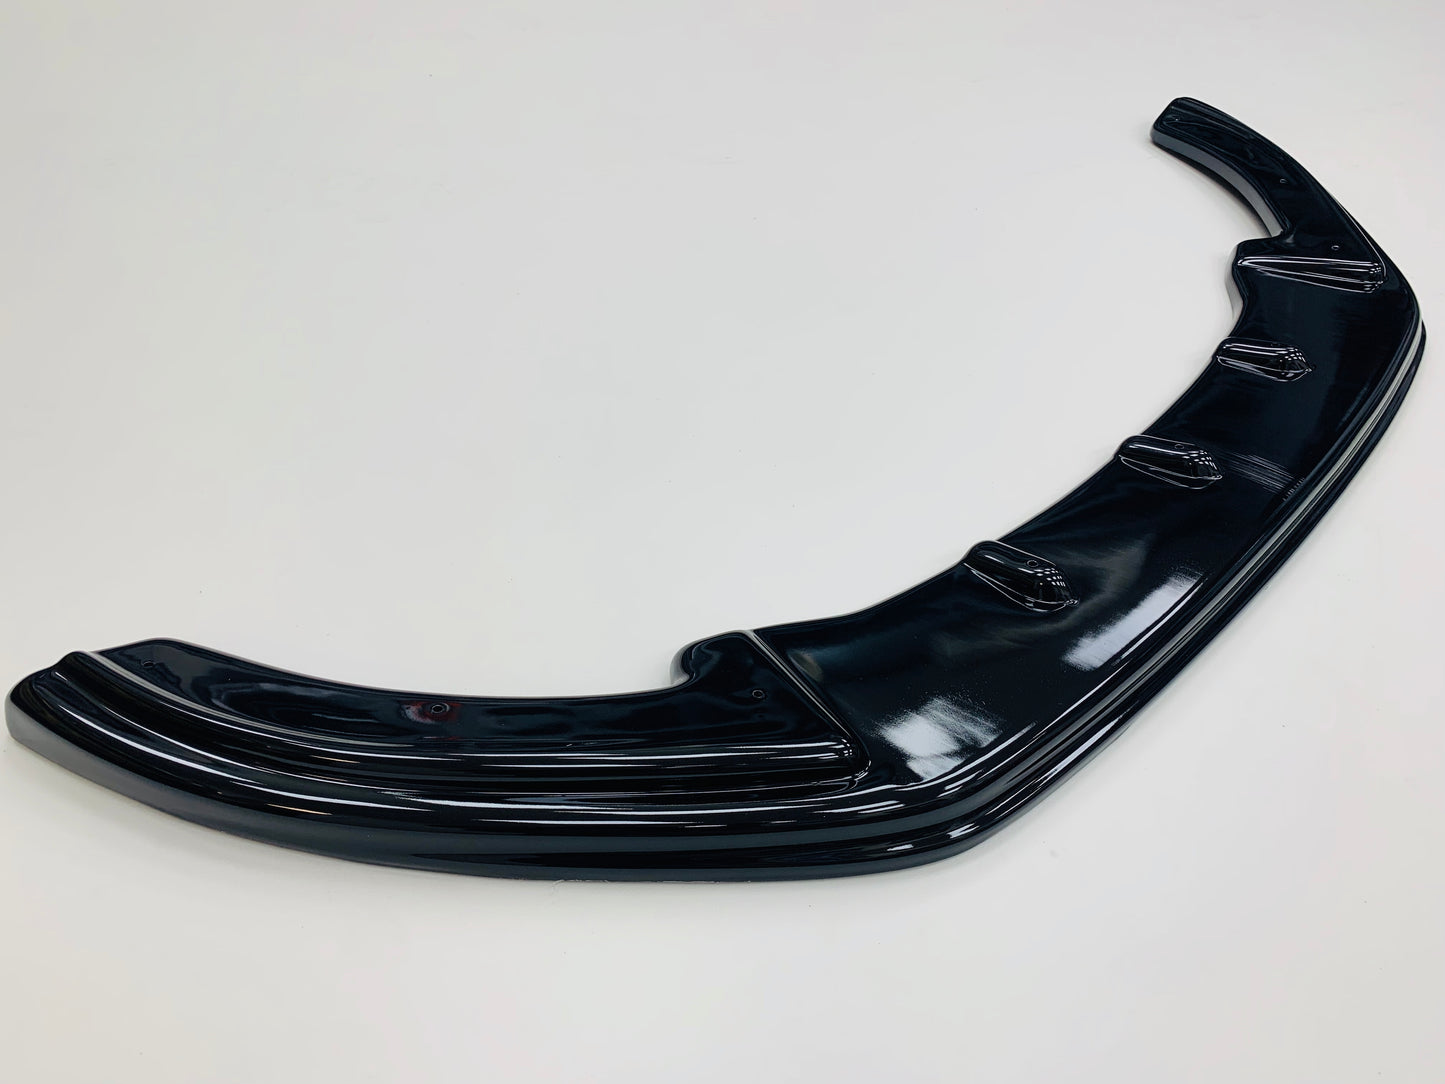 Caddy Splitter Gloss Black 10-15 ABS Plastic Great Quality NEW